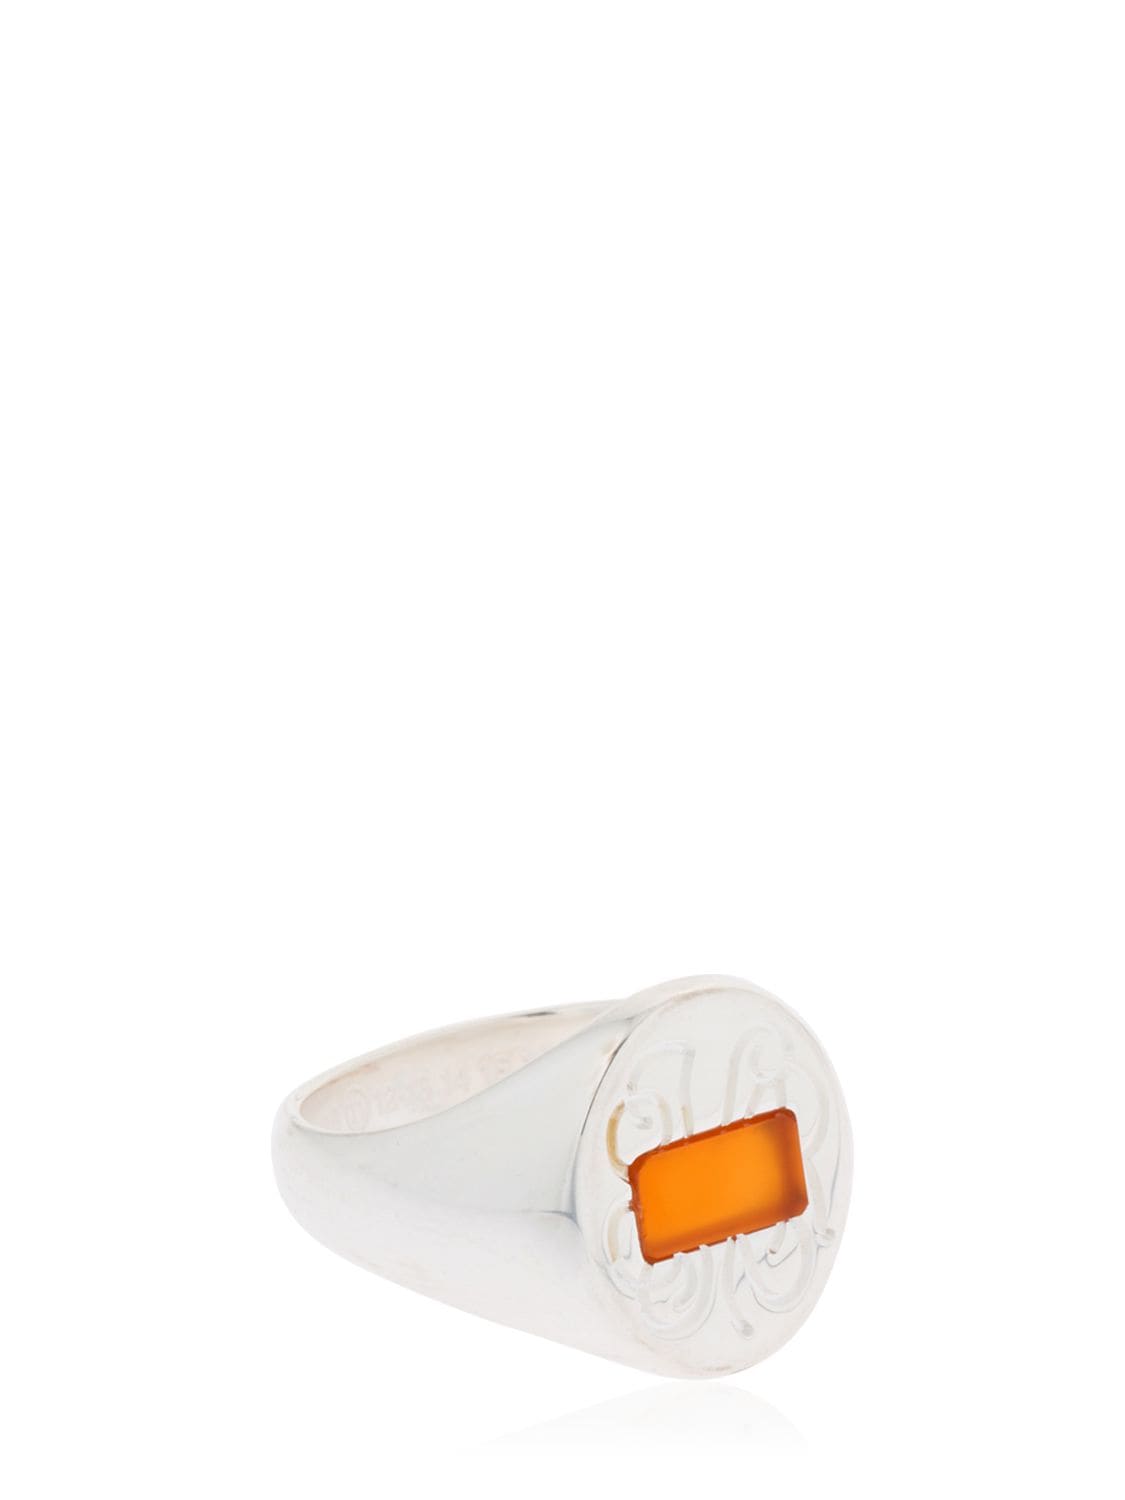 MAISON MARGIELA RED AGATE & SILVER CHEVALIER RING,67IL6X007-OTYX0